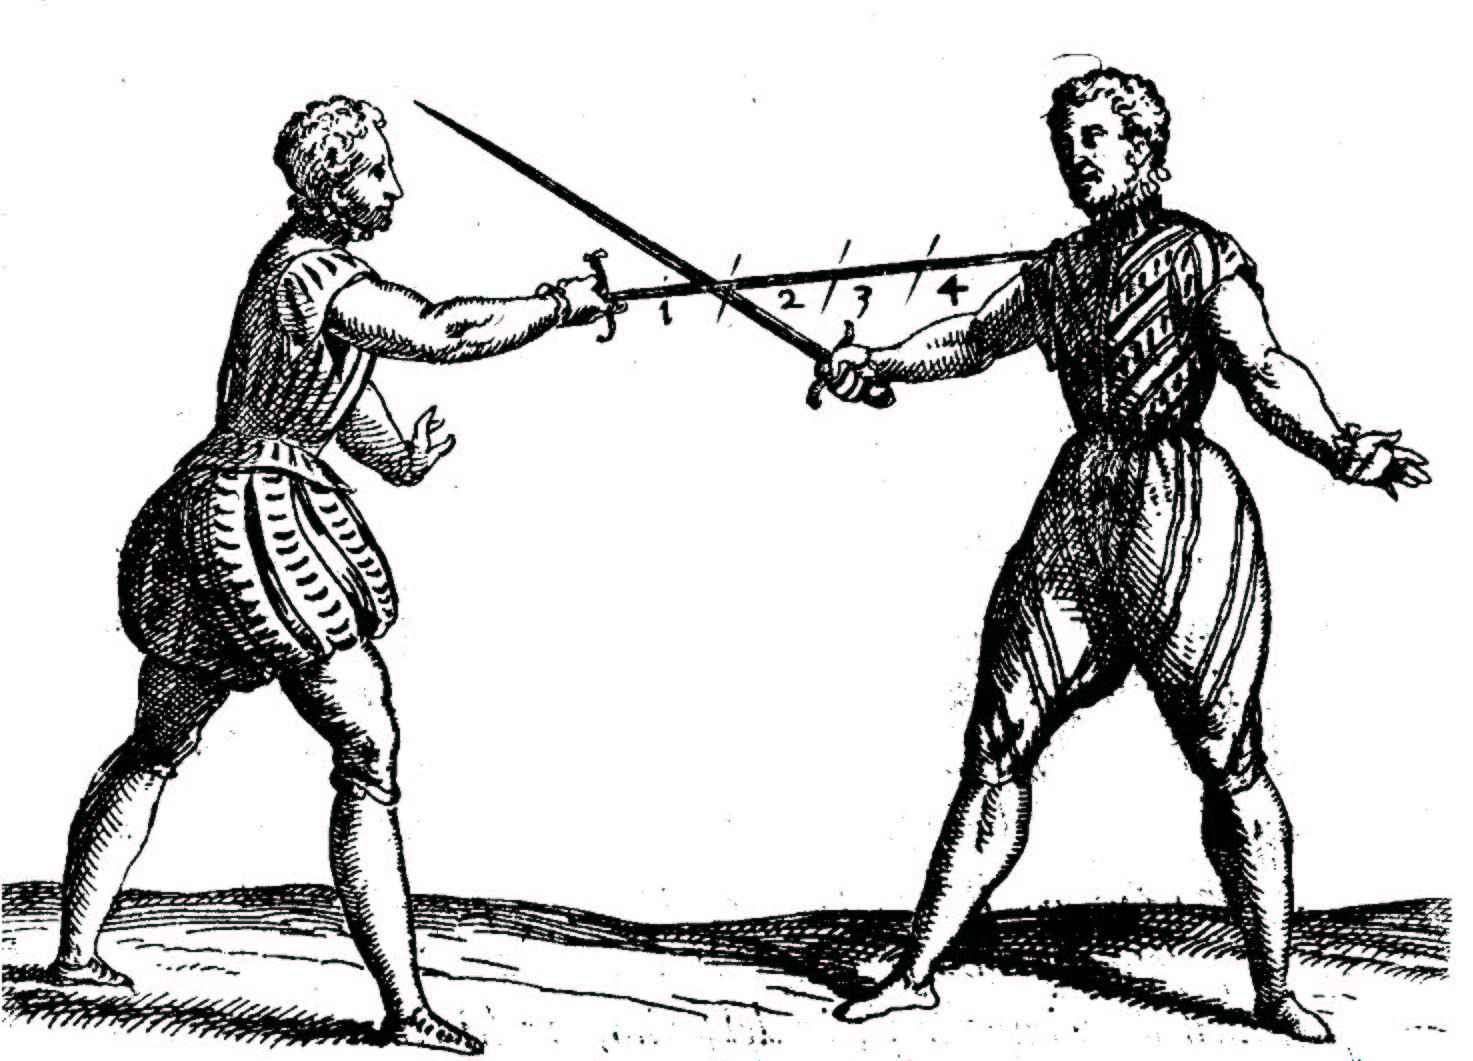 Two duelists with swords crossed;  four divisions marked off on the blade of one.